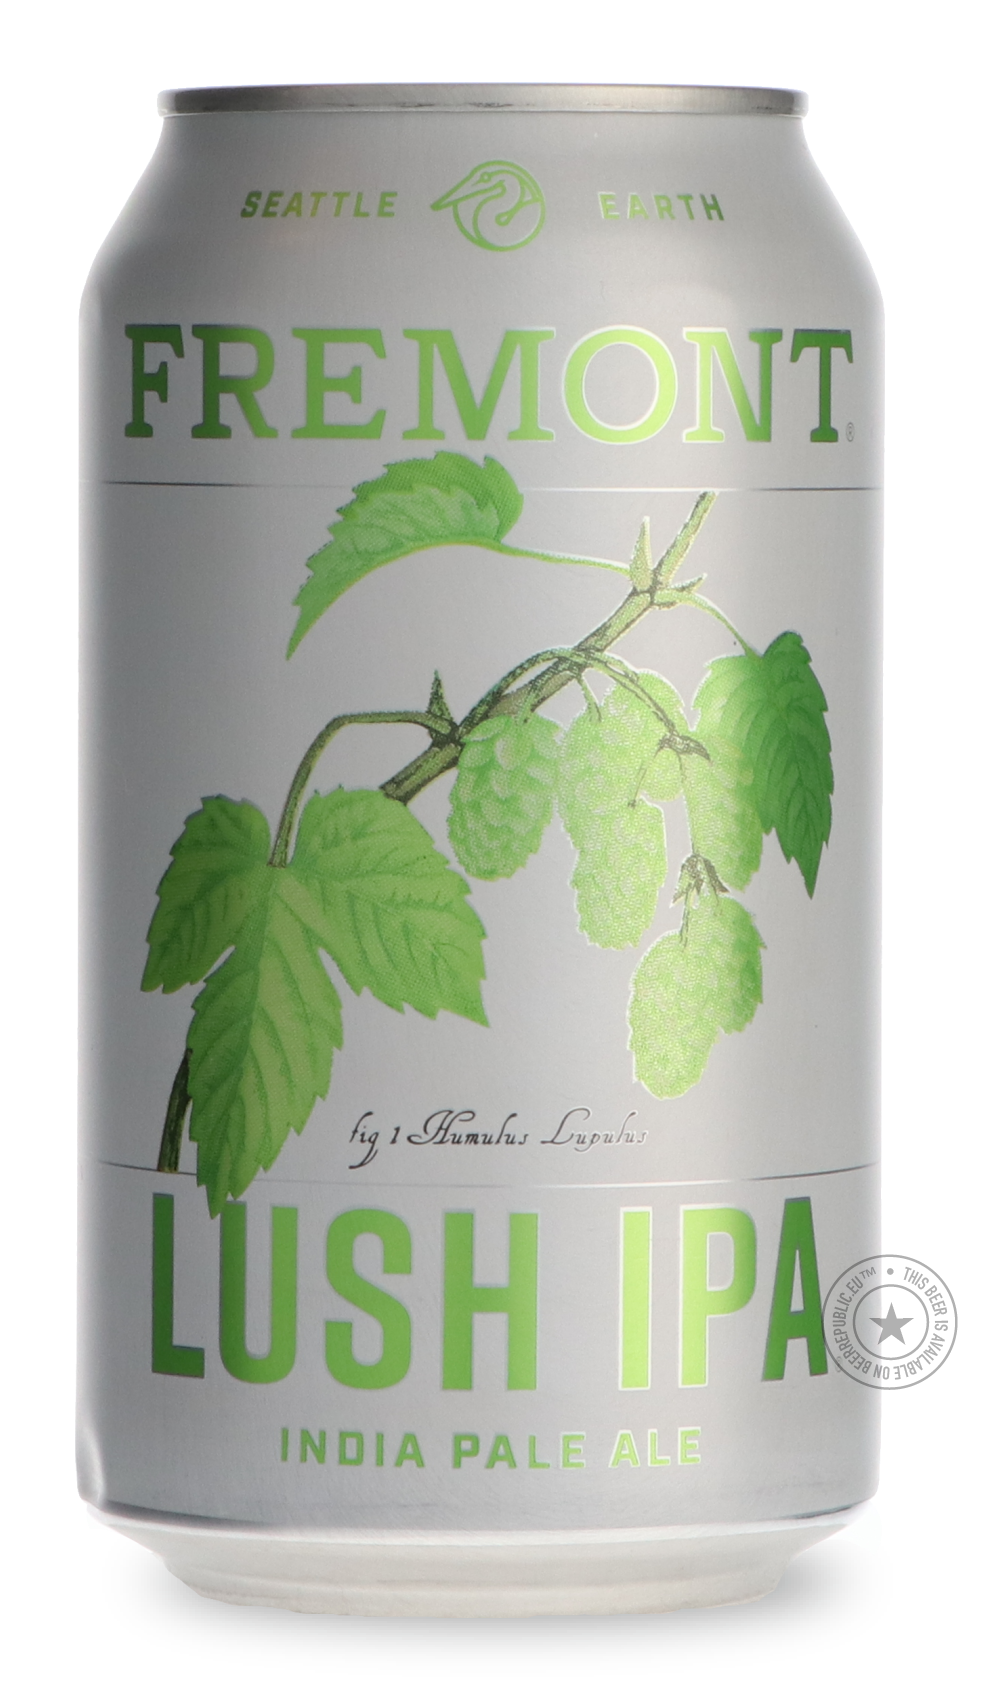 -Fremont- Lush-IPA- Only @ Beer Republic - The best online beer store for American & Canadian craft beer - Buy beer online from the USA and Canada - Bier online kopen - Amerikaans bier kopen - Craft beer store - Craft beer kopen - Amerikanisch bier kaufen - Bier online kaufen - Acheter biere online - IPA - Stout - Porter - New England IPA - Hazy IPA - Imperial Stout - Barrel Aged - Barrel Aged Imperial Stout - Brown - Dark beer - Blond - Blonde - Pilsner - Lager - Wheat - Weizen - Amber - Barley Wine - Quad